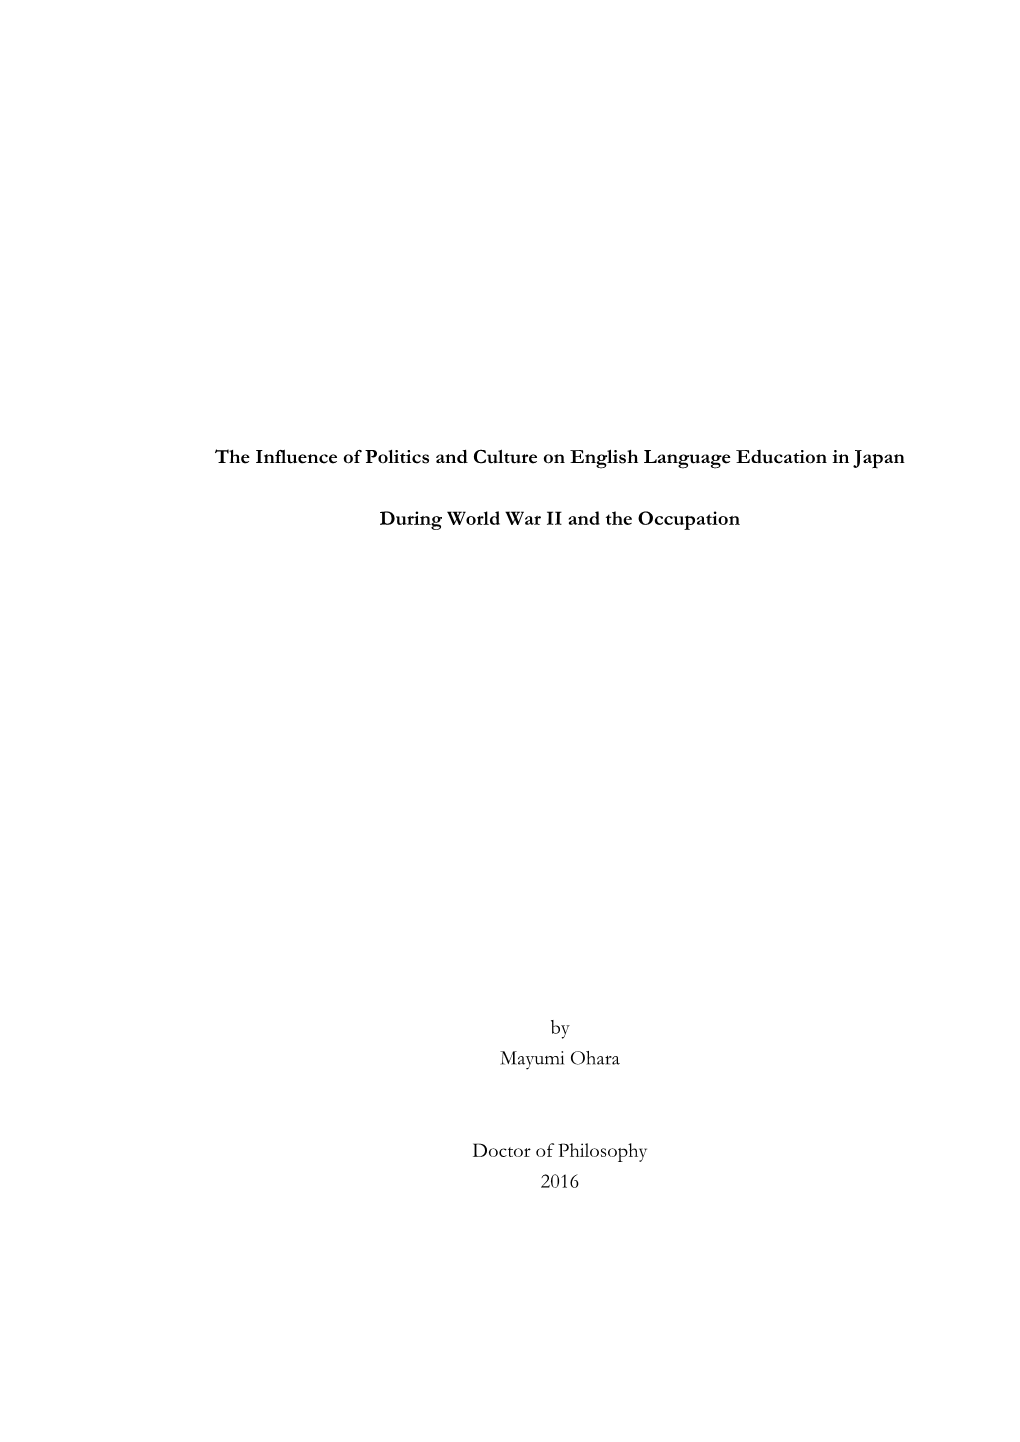 The Influence of Politics and Culture on English Language Education in Japan